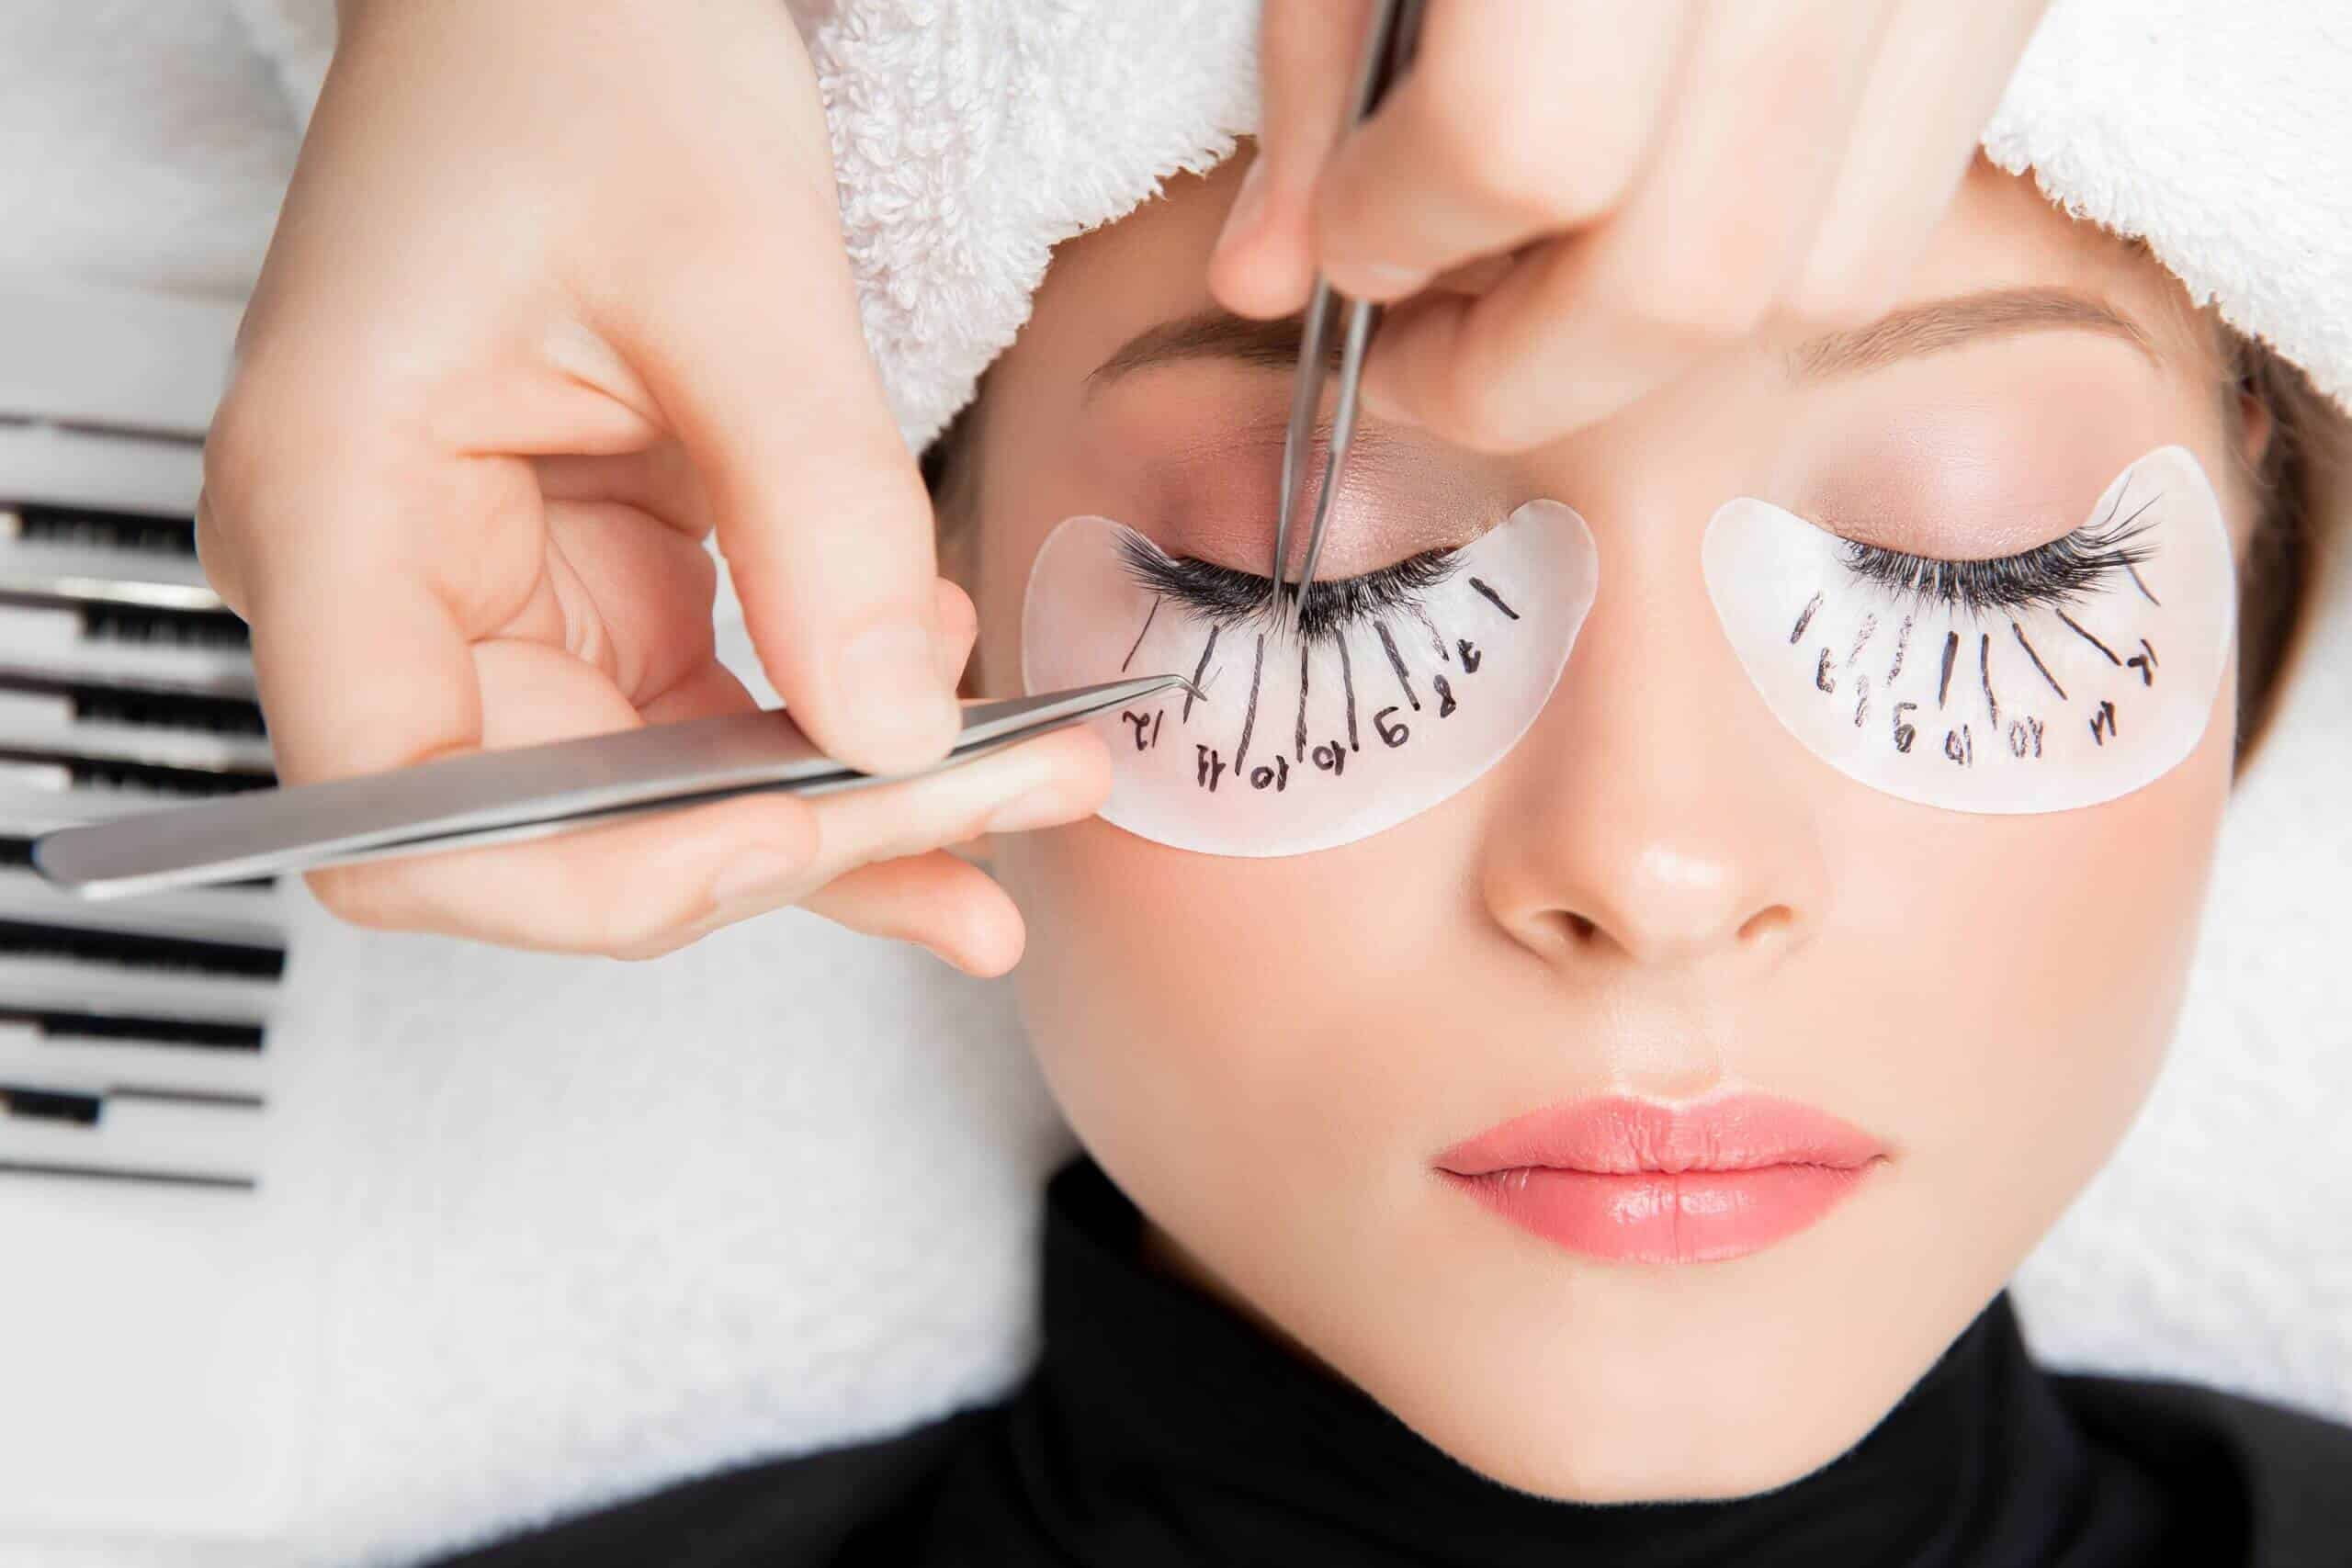 Enhance Your Eyes With Lash Extensions | TrueBeauty Forever Lash Extensions in Kaysville, UT